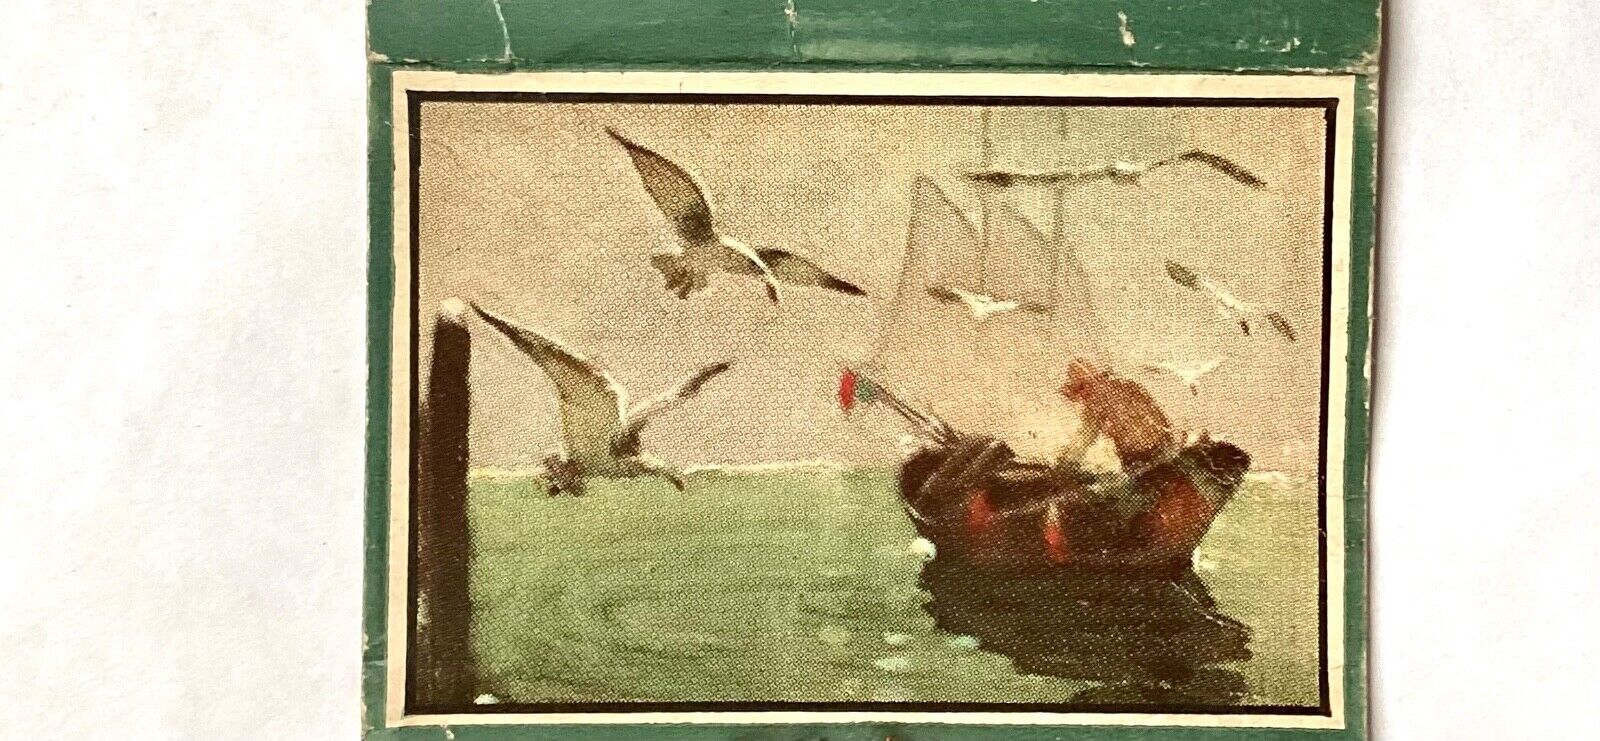 RARE 1930’S-40’S ROCKPORT, MASS. ARTIST ANTHONY THIEME PERSONAL MATCHBOOK COVER